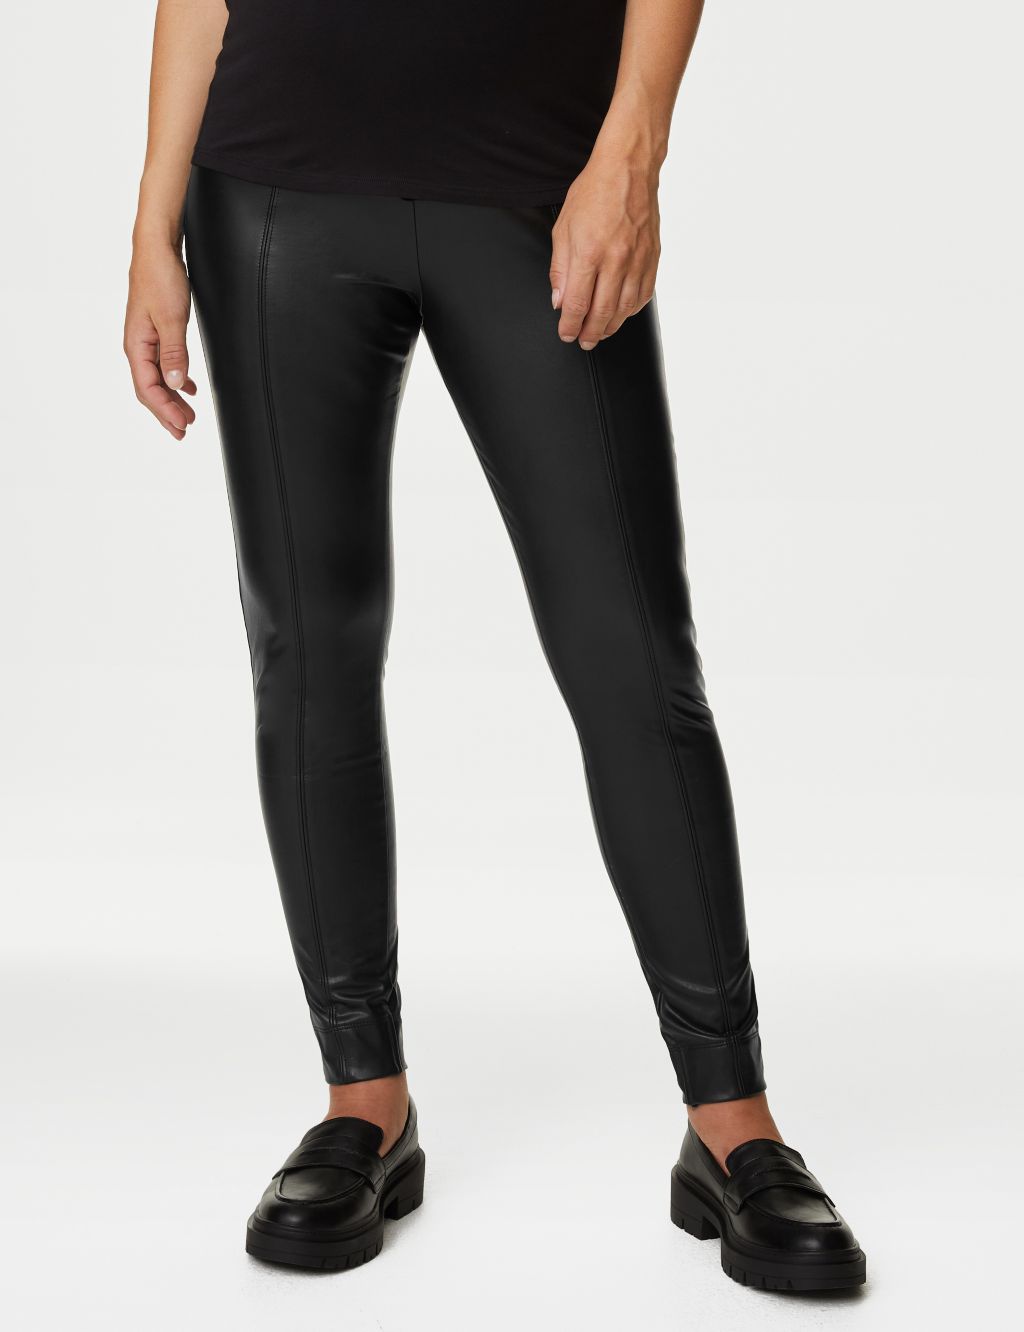 Maternity Leather Look Over Bump Leggings image 4